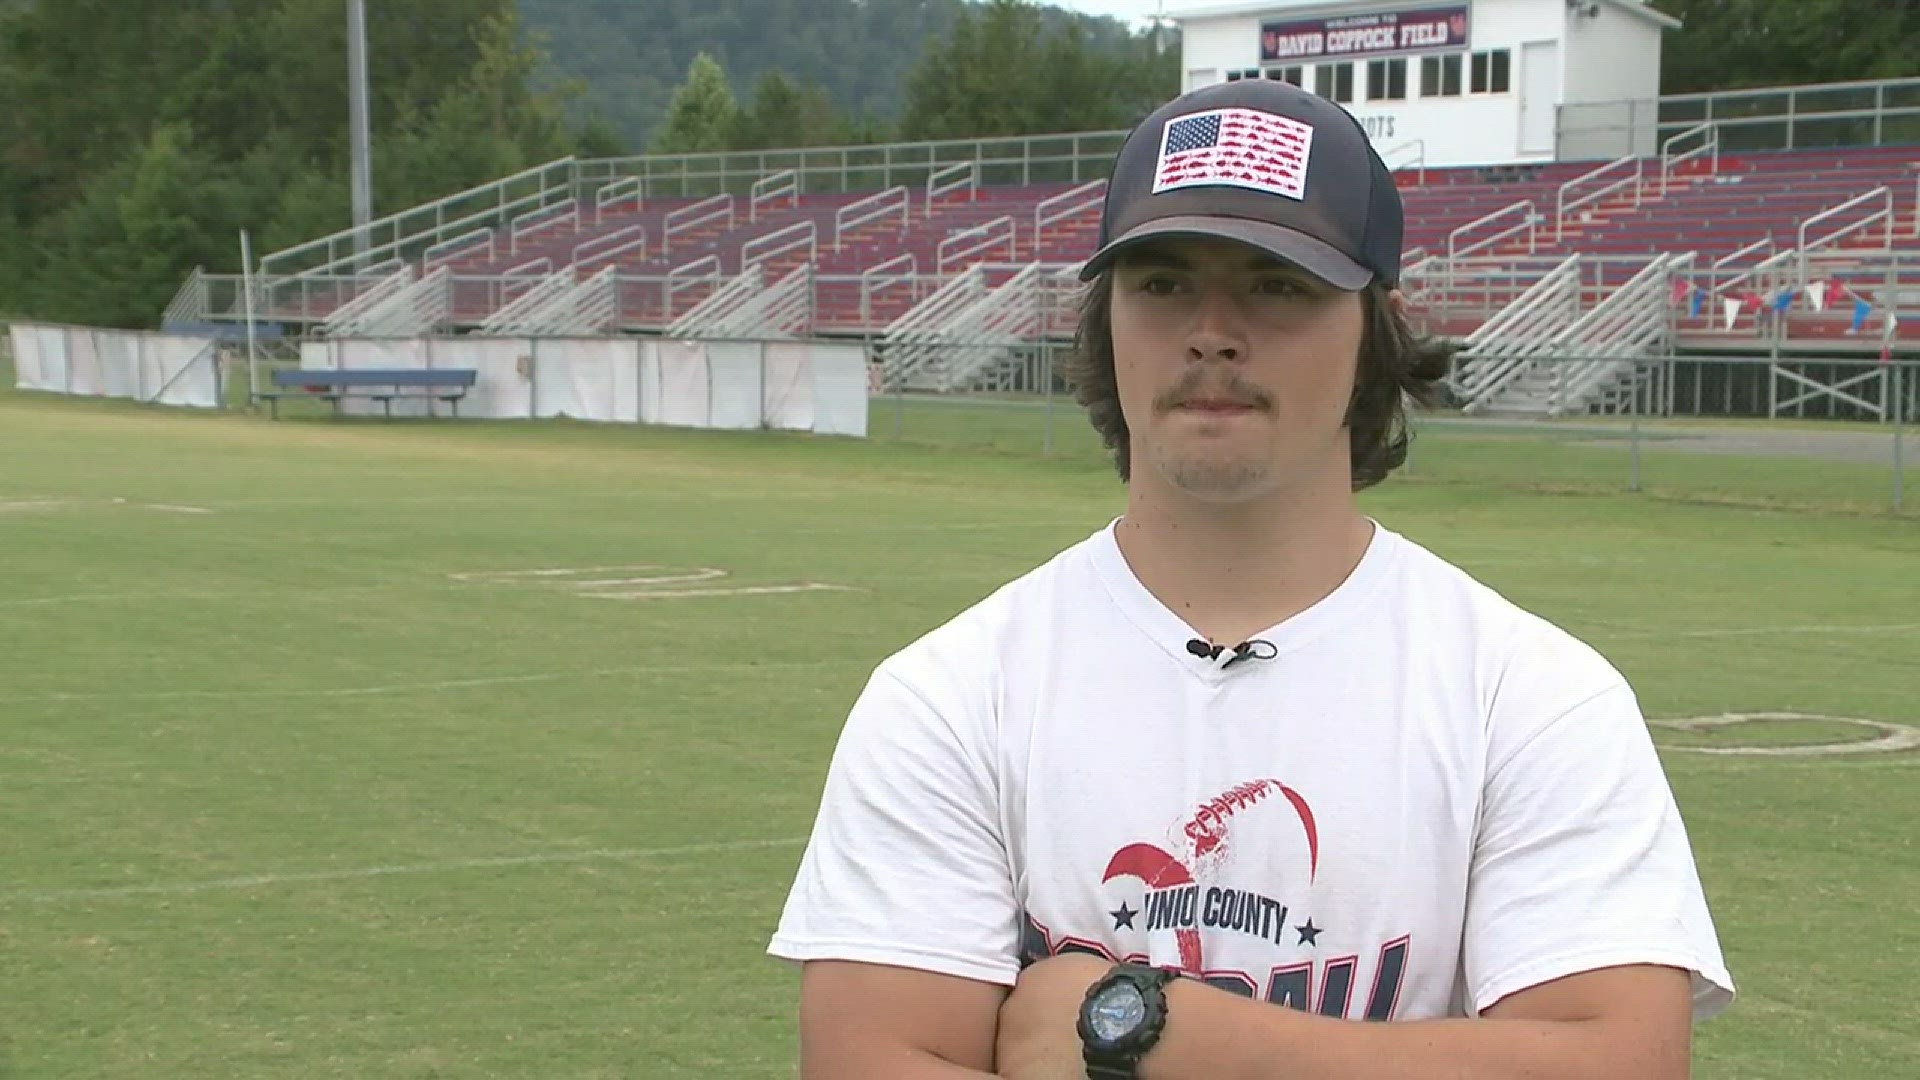 Union County defensive end Andrew Kitts talks about the Patriots ending their 28-game losing streak.